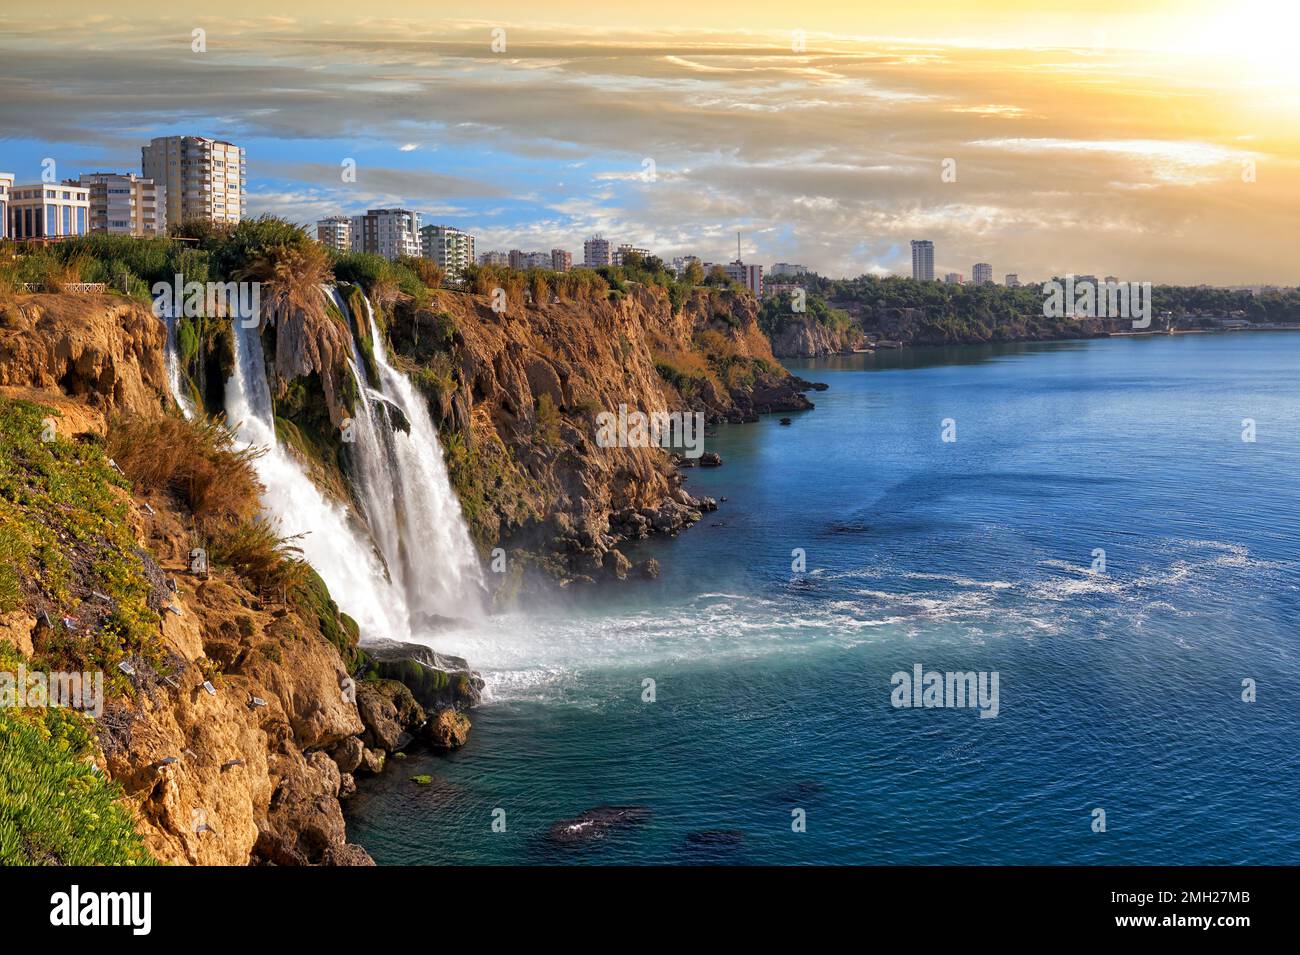 Picturesque morning landscape of the Lower Duden waterfall against the backdrop of the steep shores of the Mediterranean Sea and urban development in Stock Photo